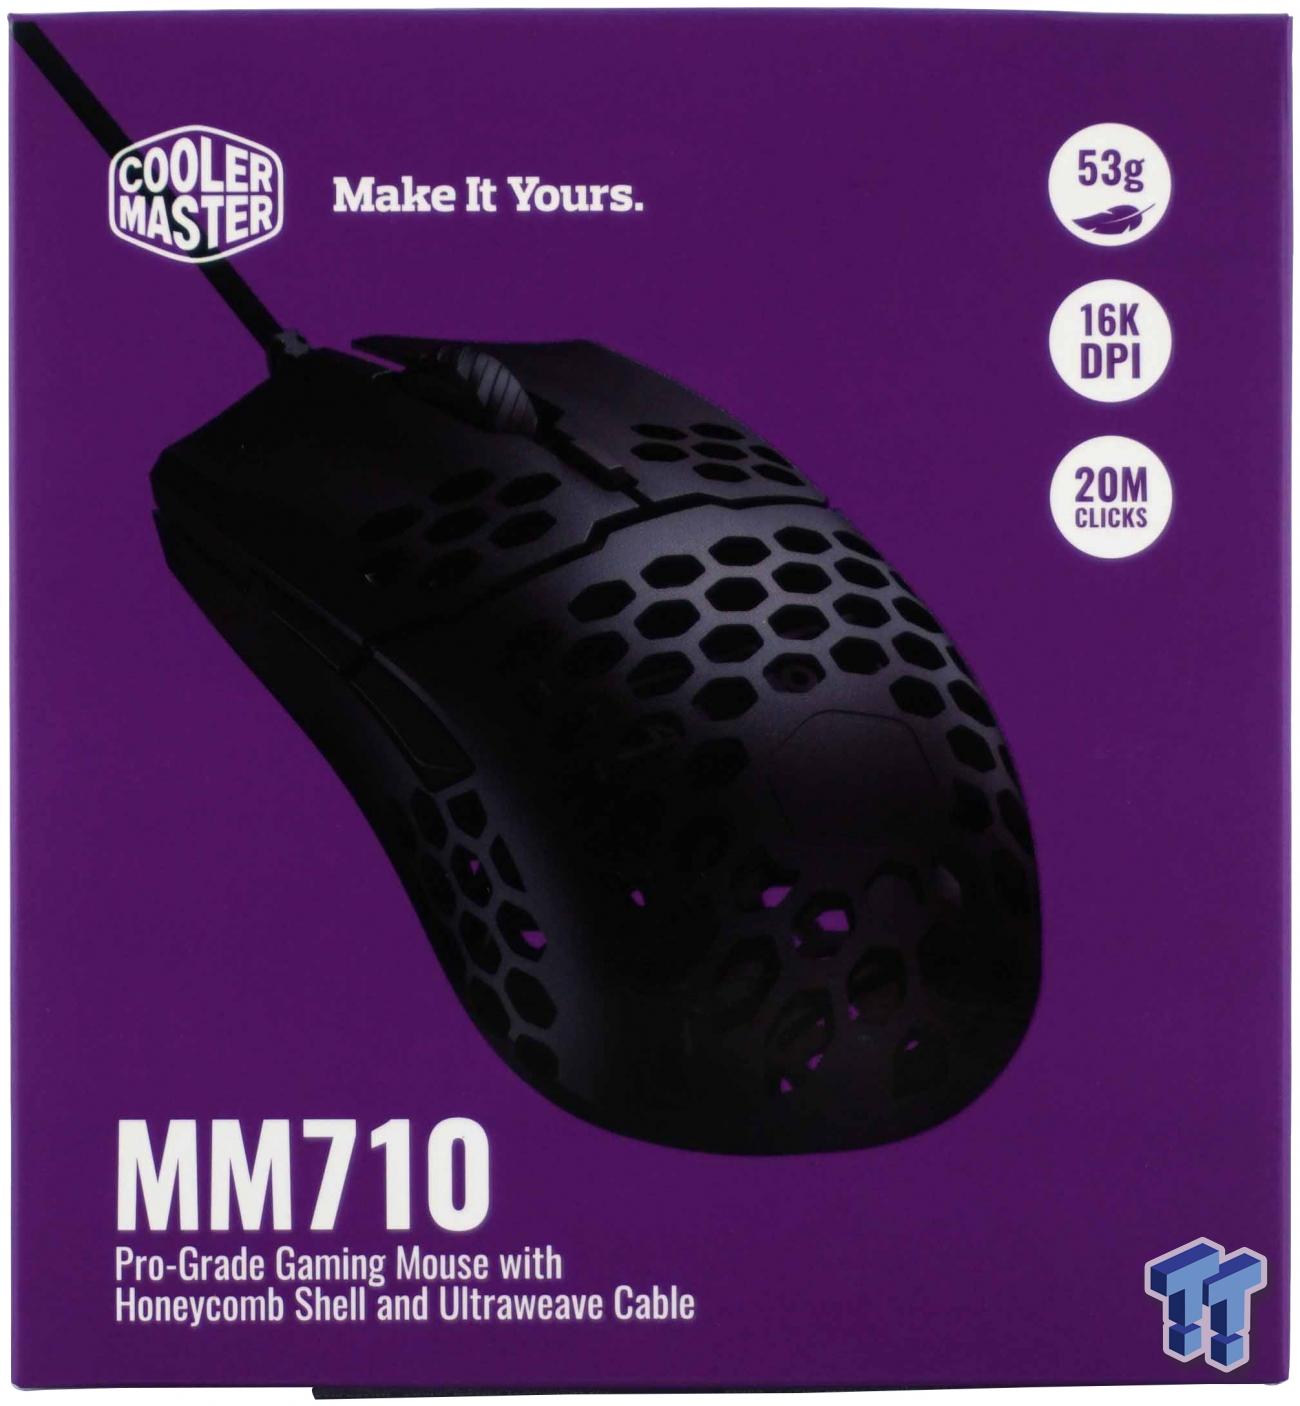 https://static.tweaktown.com/content/9/1/9193_02_cooler-master-mastermouse-mm710-gaming-mouse-review_full.jpg